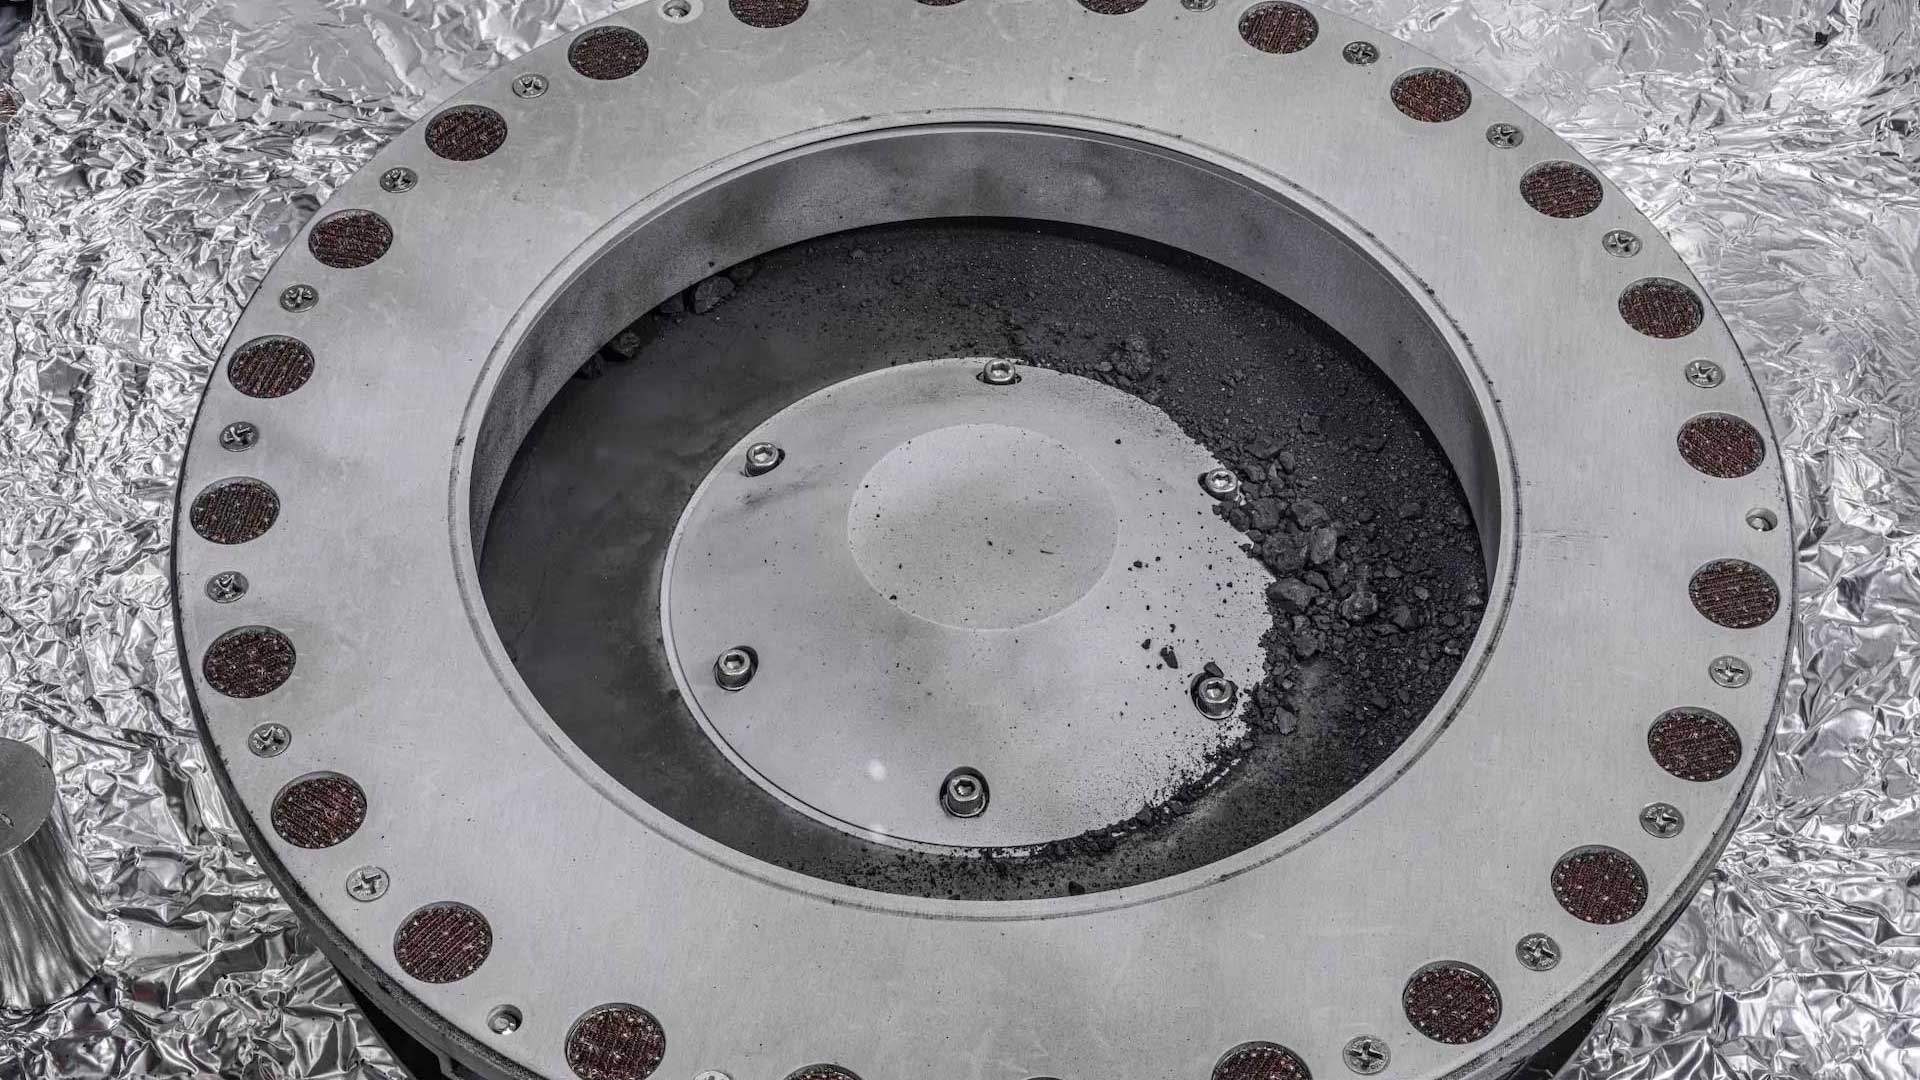 A view of the outside of the OSIRIS-REx sample collector. Sample material from asteroid Bennu can be seen on the middle right. Scientists have found evidence of both carbon and water in initial analysis of this material. The bulk of the sample is located inside.